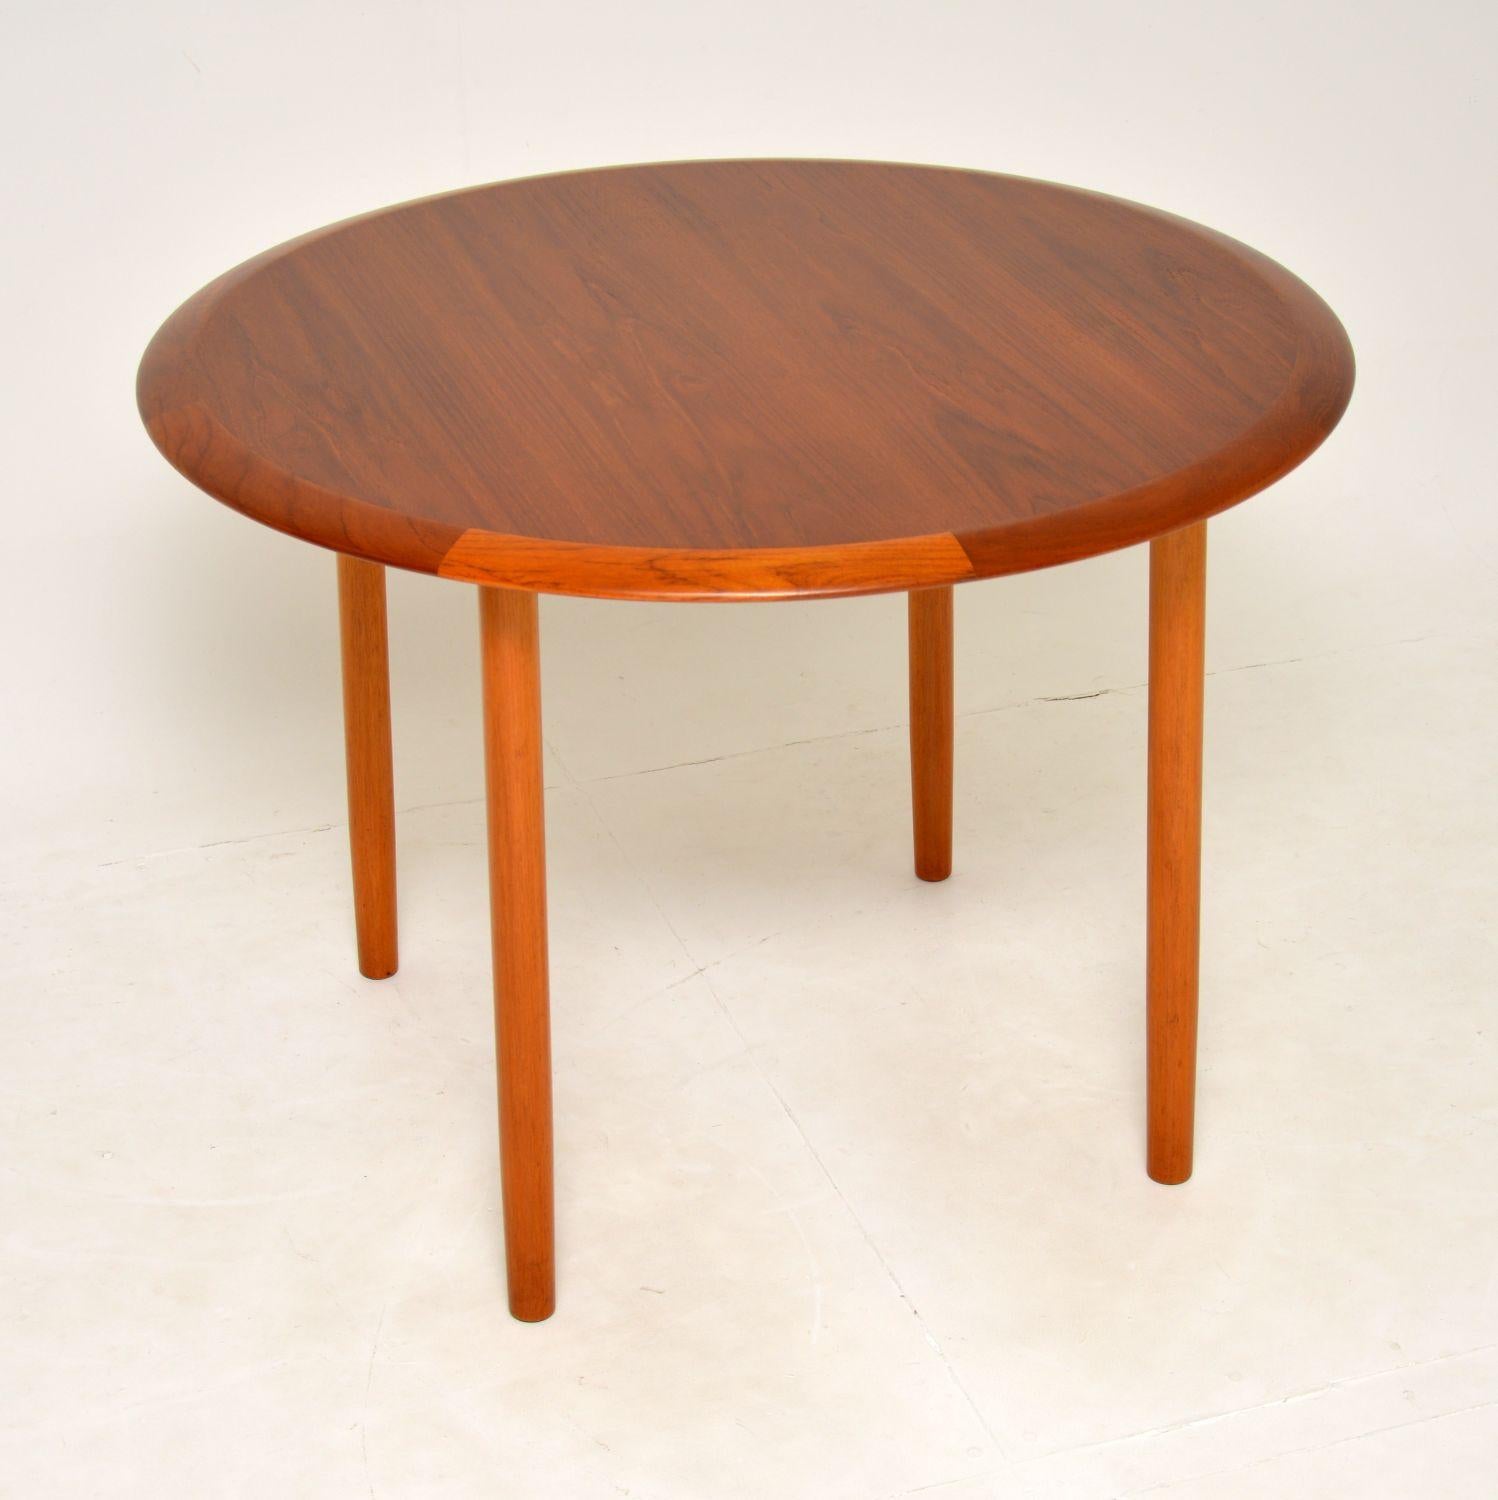 A stunning vintage Danish dining table in teak. This was made in Denmark by France & Son in the 1960’s, it was most likely designed by Peter Hvidt & Orla Molgaard-Nielsen.

The quality is amazing and this is a useful size, not too imposing and